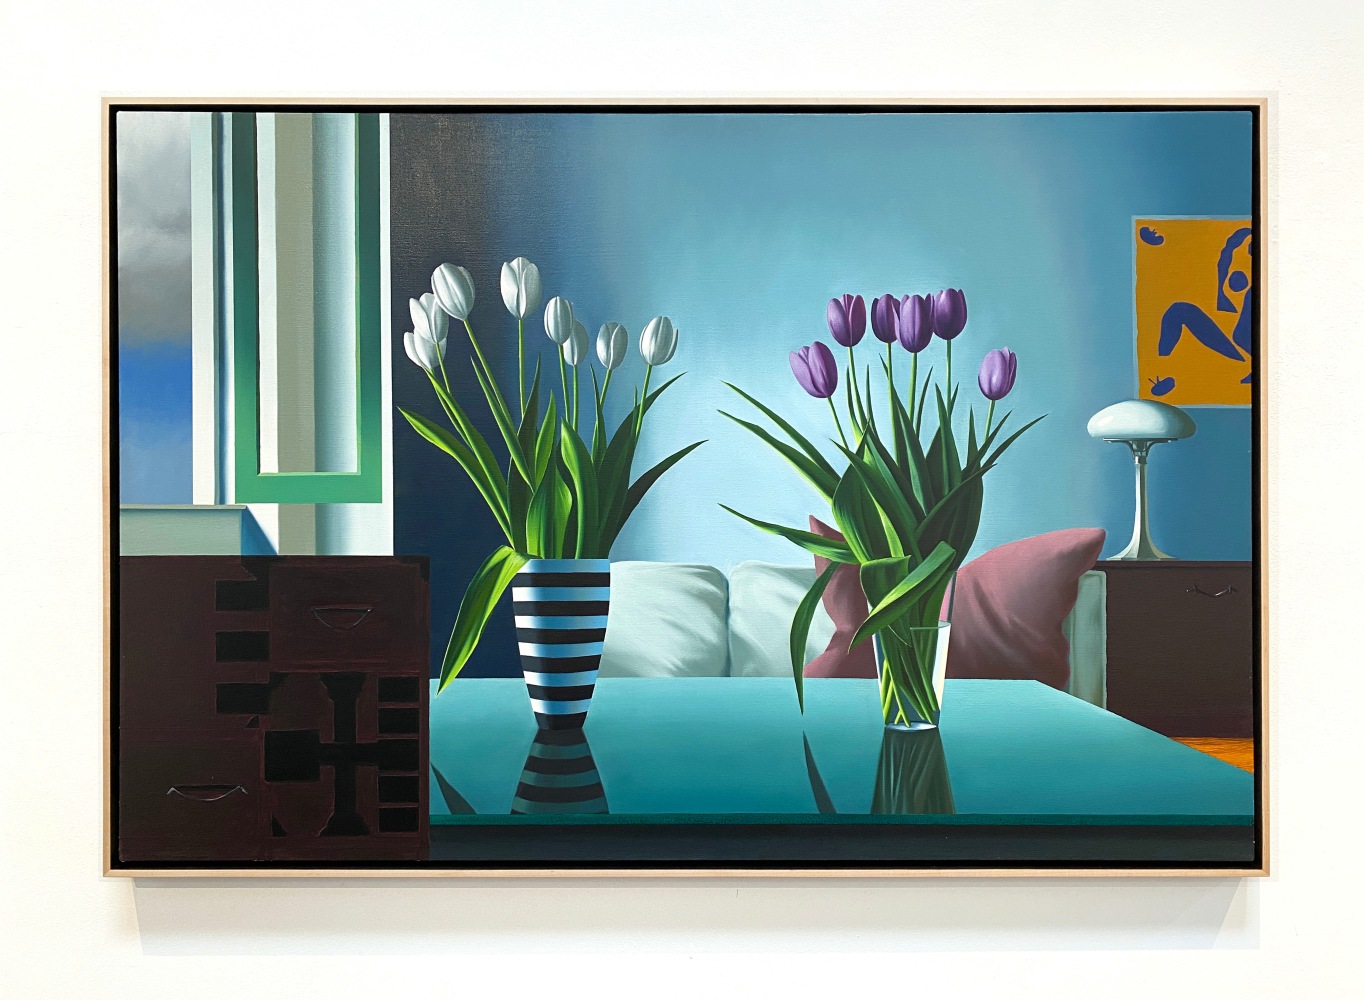 Interior with Two Vases and Matisse Cut-Out, 2022
Oil on canvas
36 x 54 inches
COH095